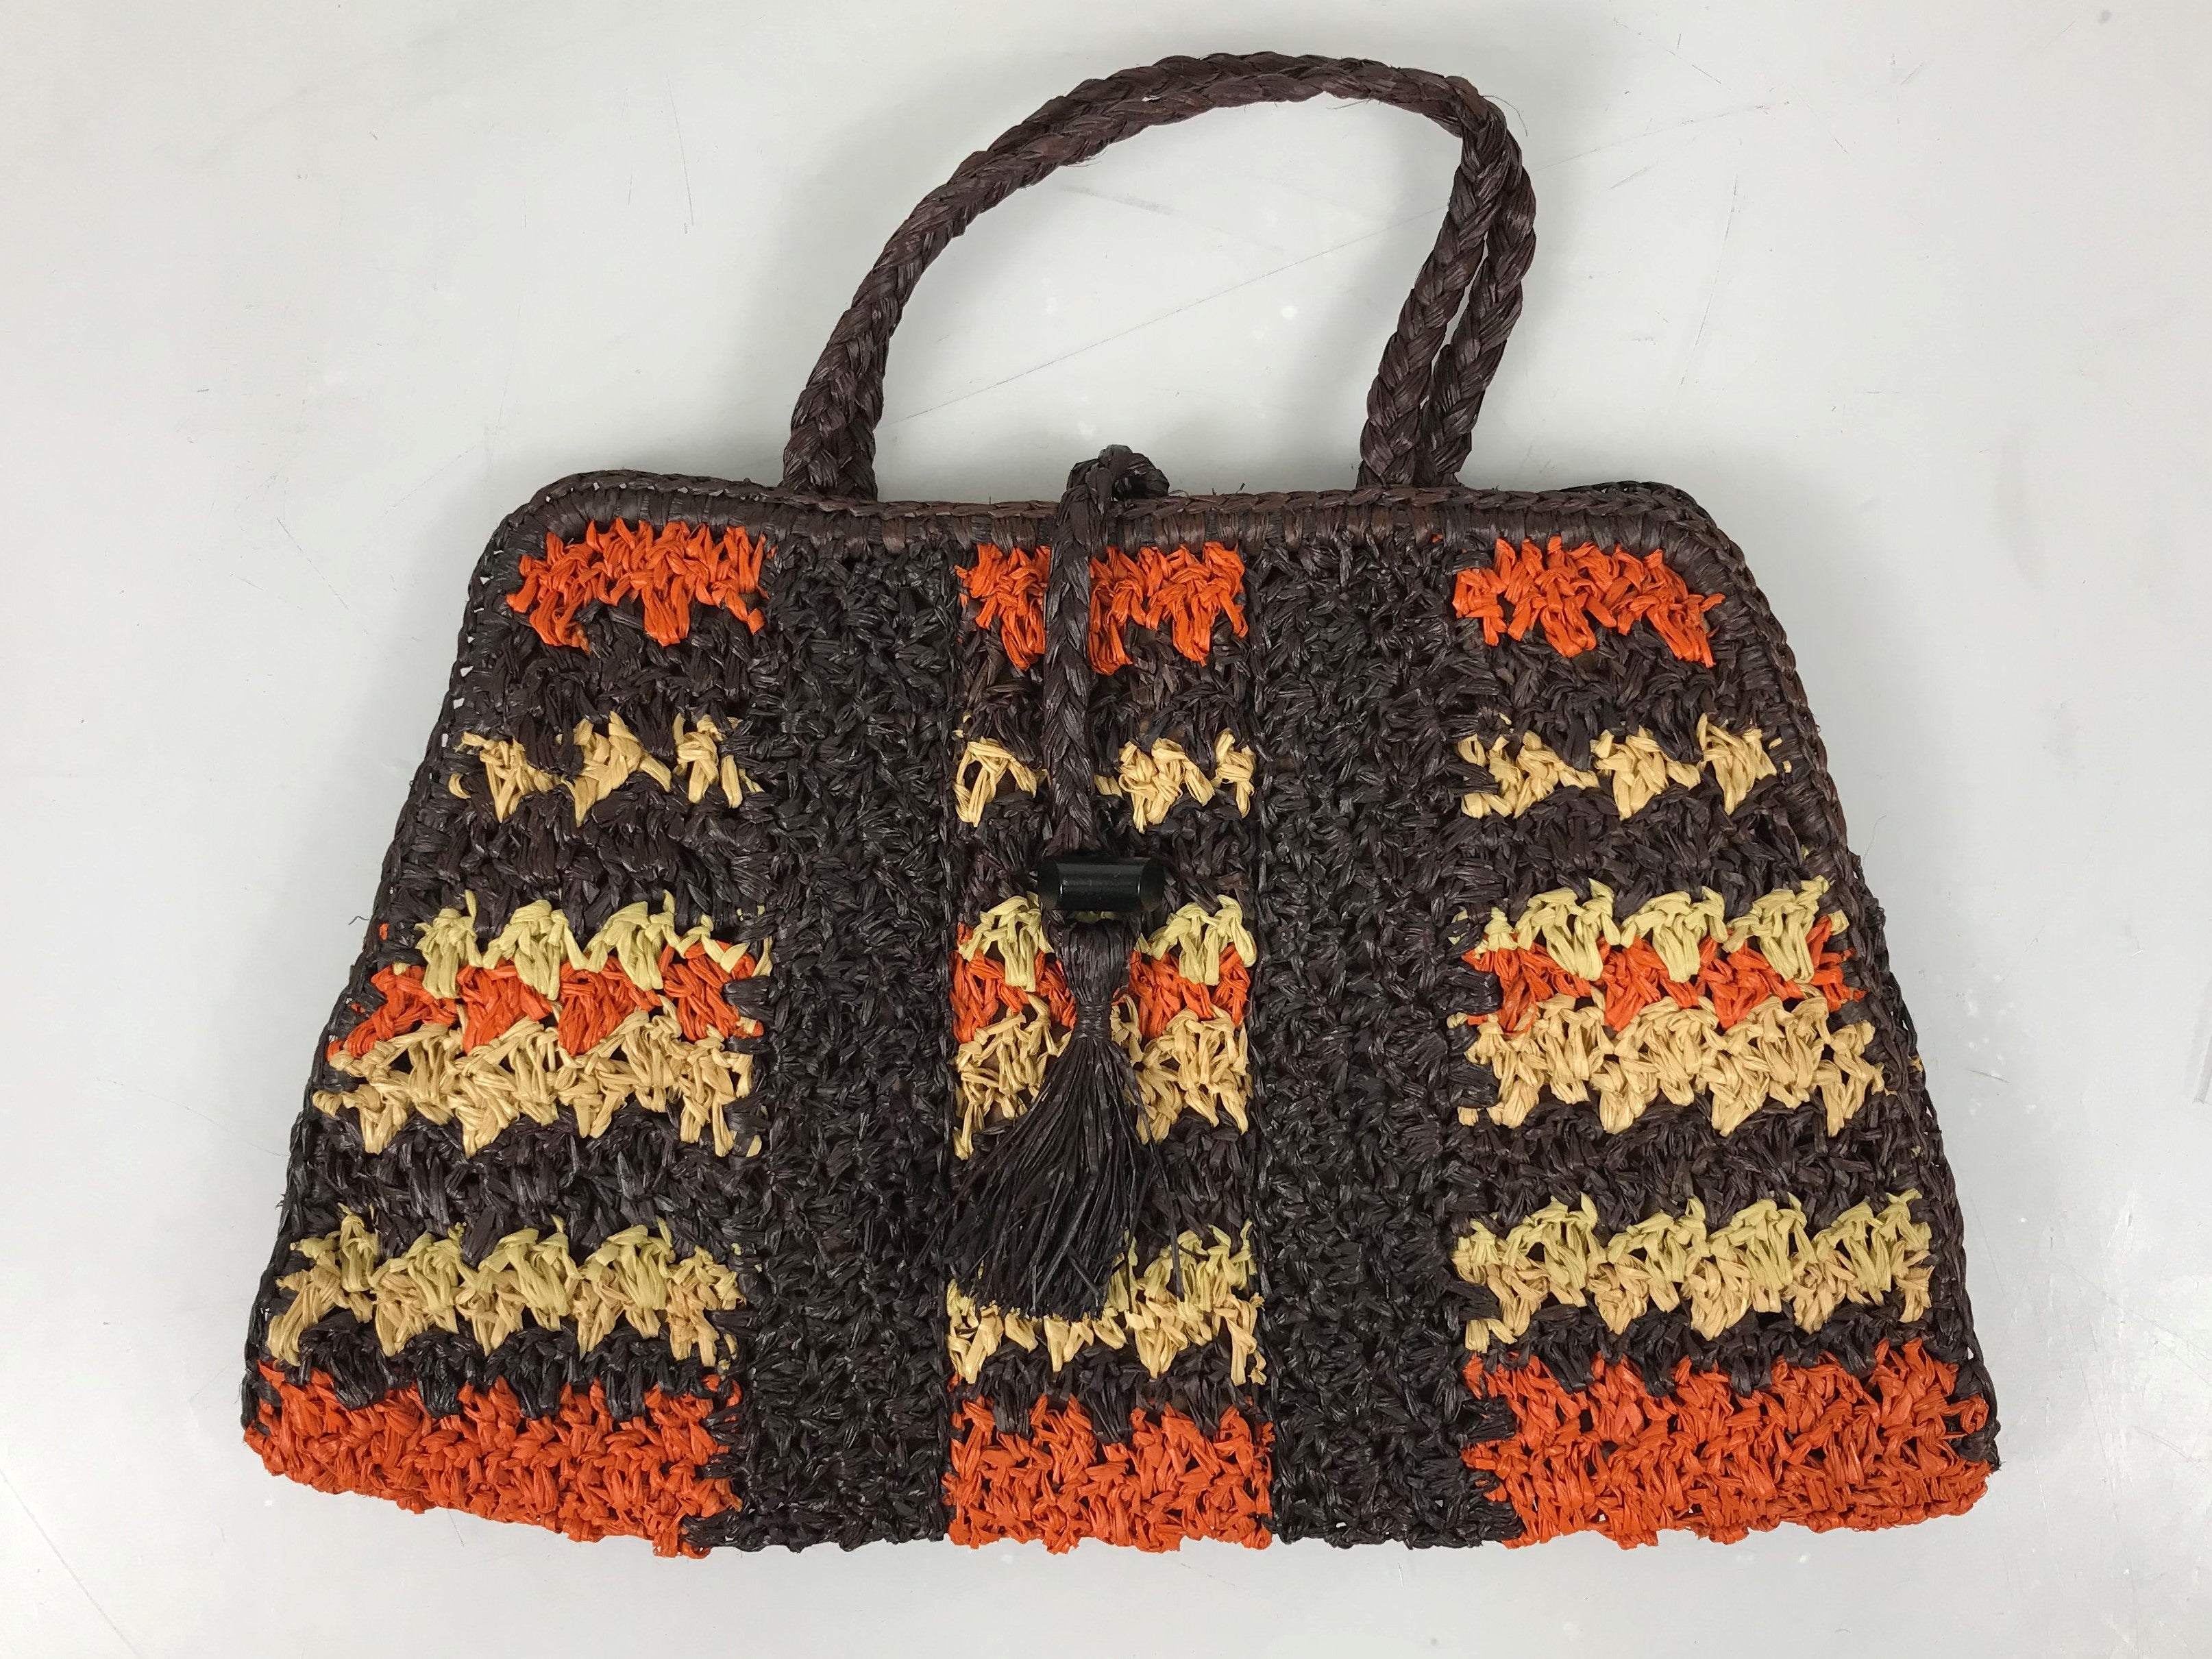 Vintage Orange and Brown 1950s Style Straw-Knit Purse